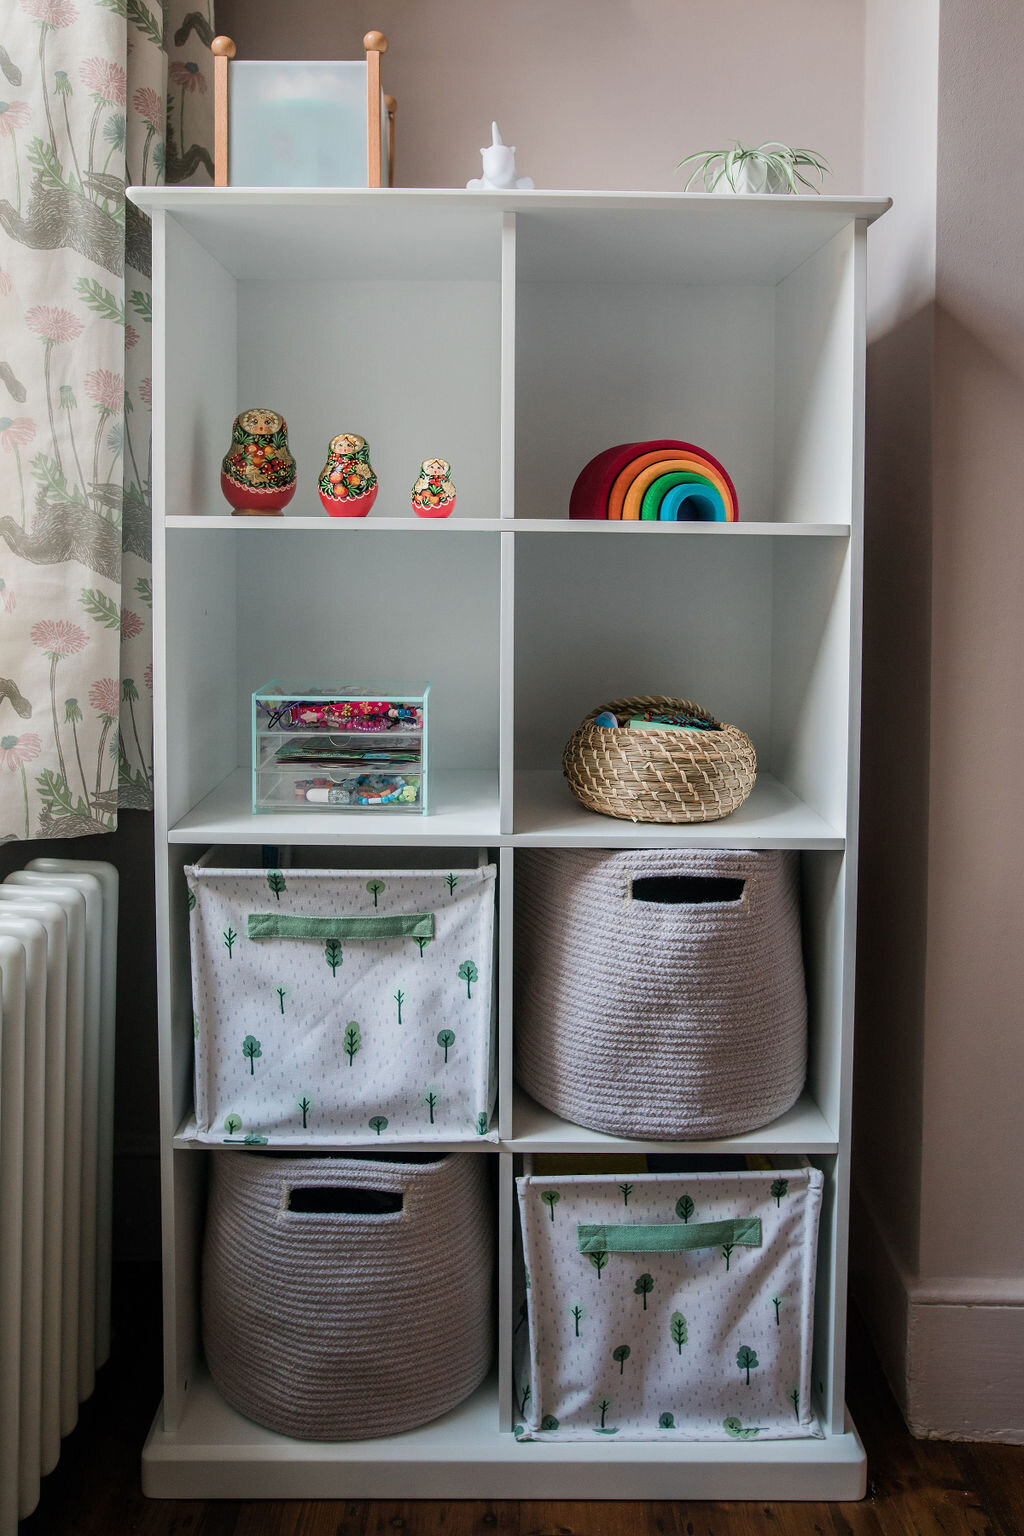 White cube shelving unit with ornaments and insert bins (Copy) (Copy)